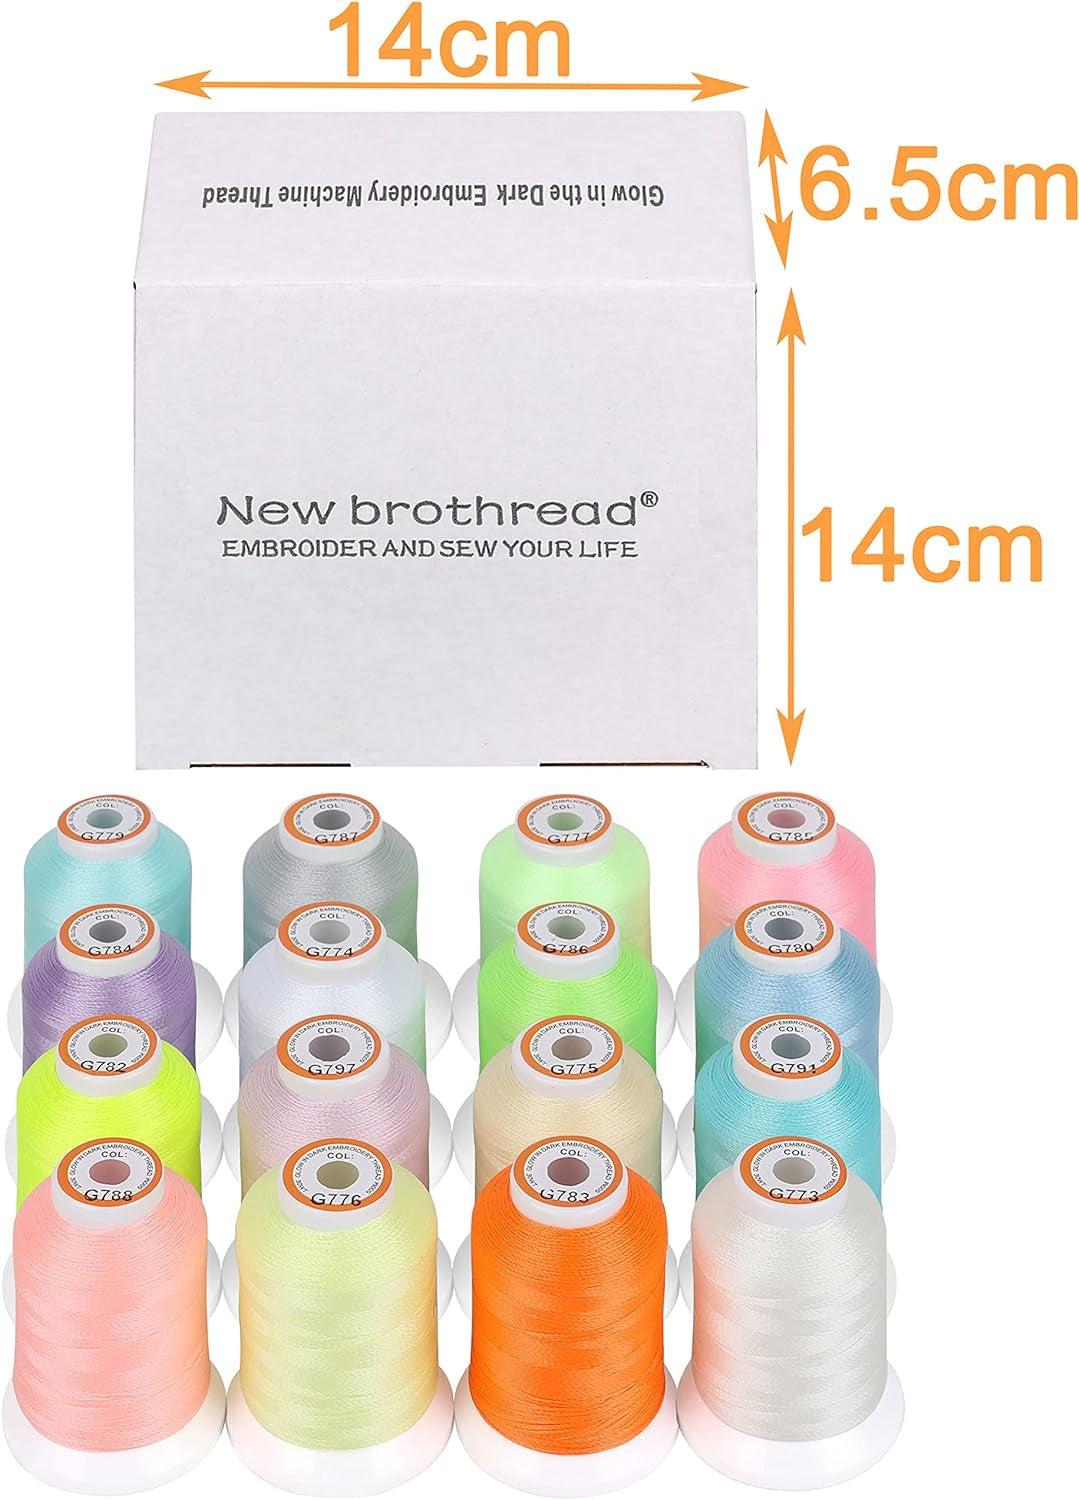 16 Colors Luminary Glow in the Dark Embroidery Machine Thread Kit 30WT 500M(550Y) Each Spool for Embroidery, Quilting, Sewing